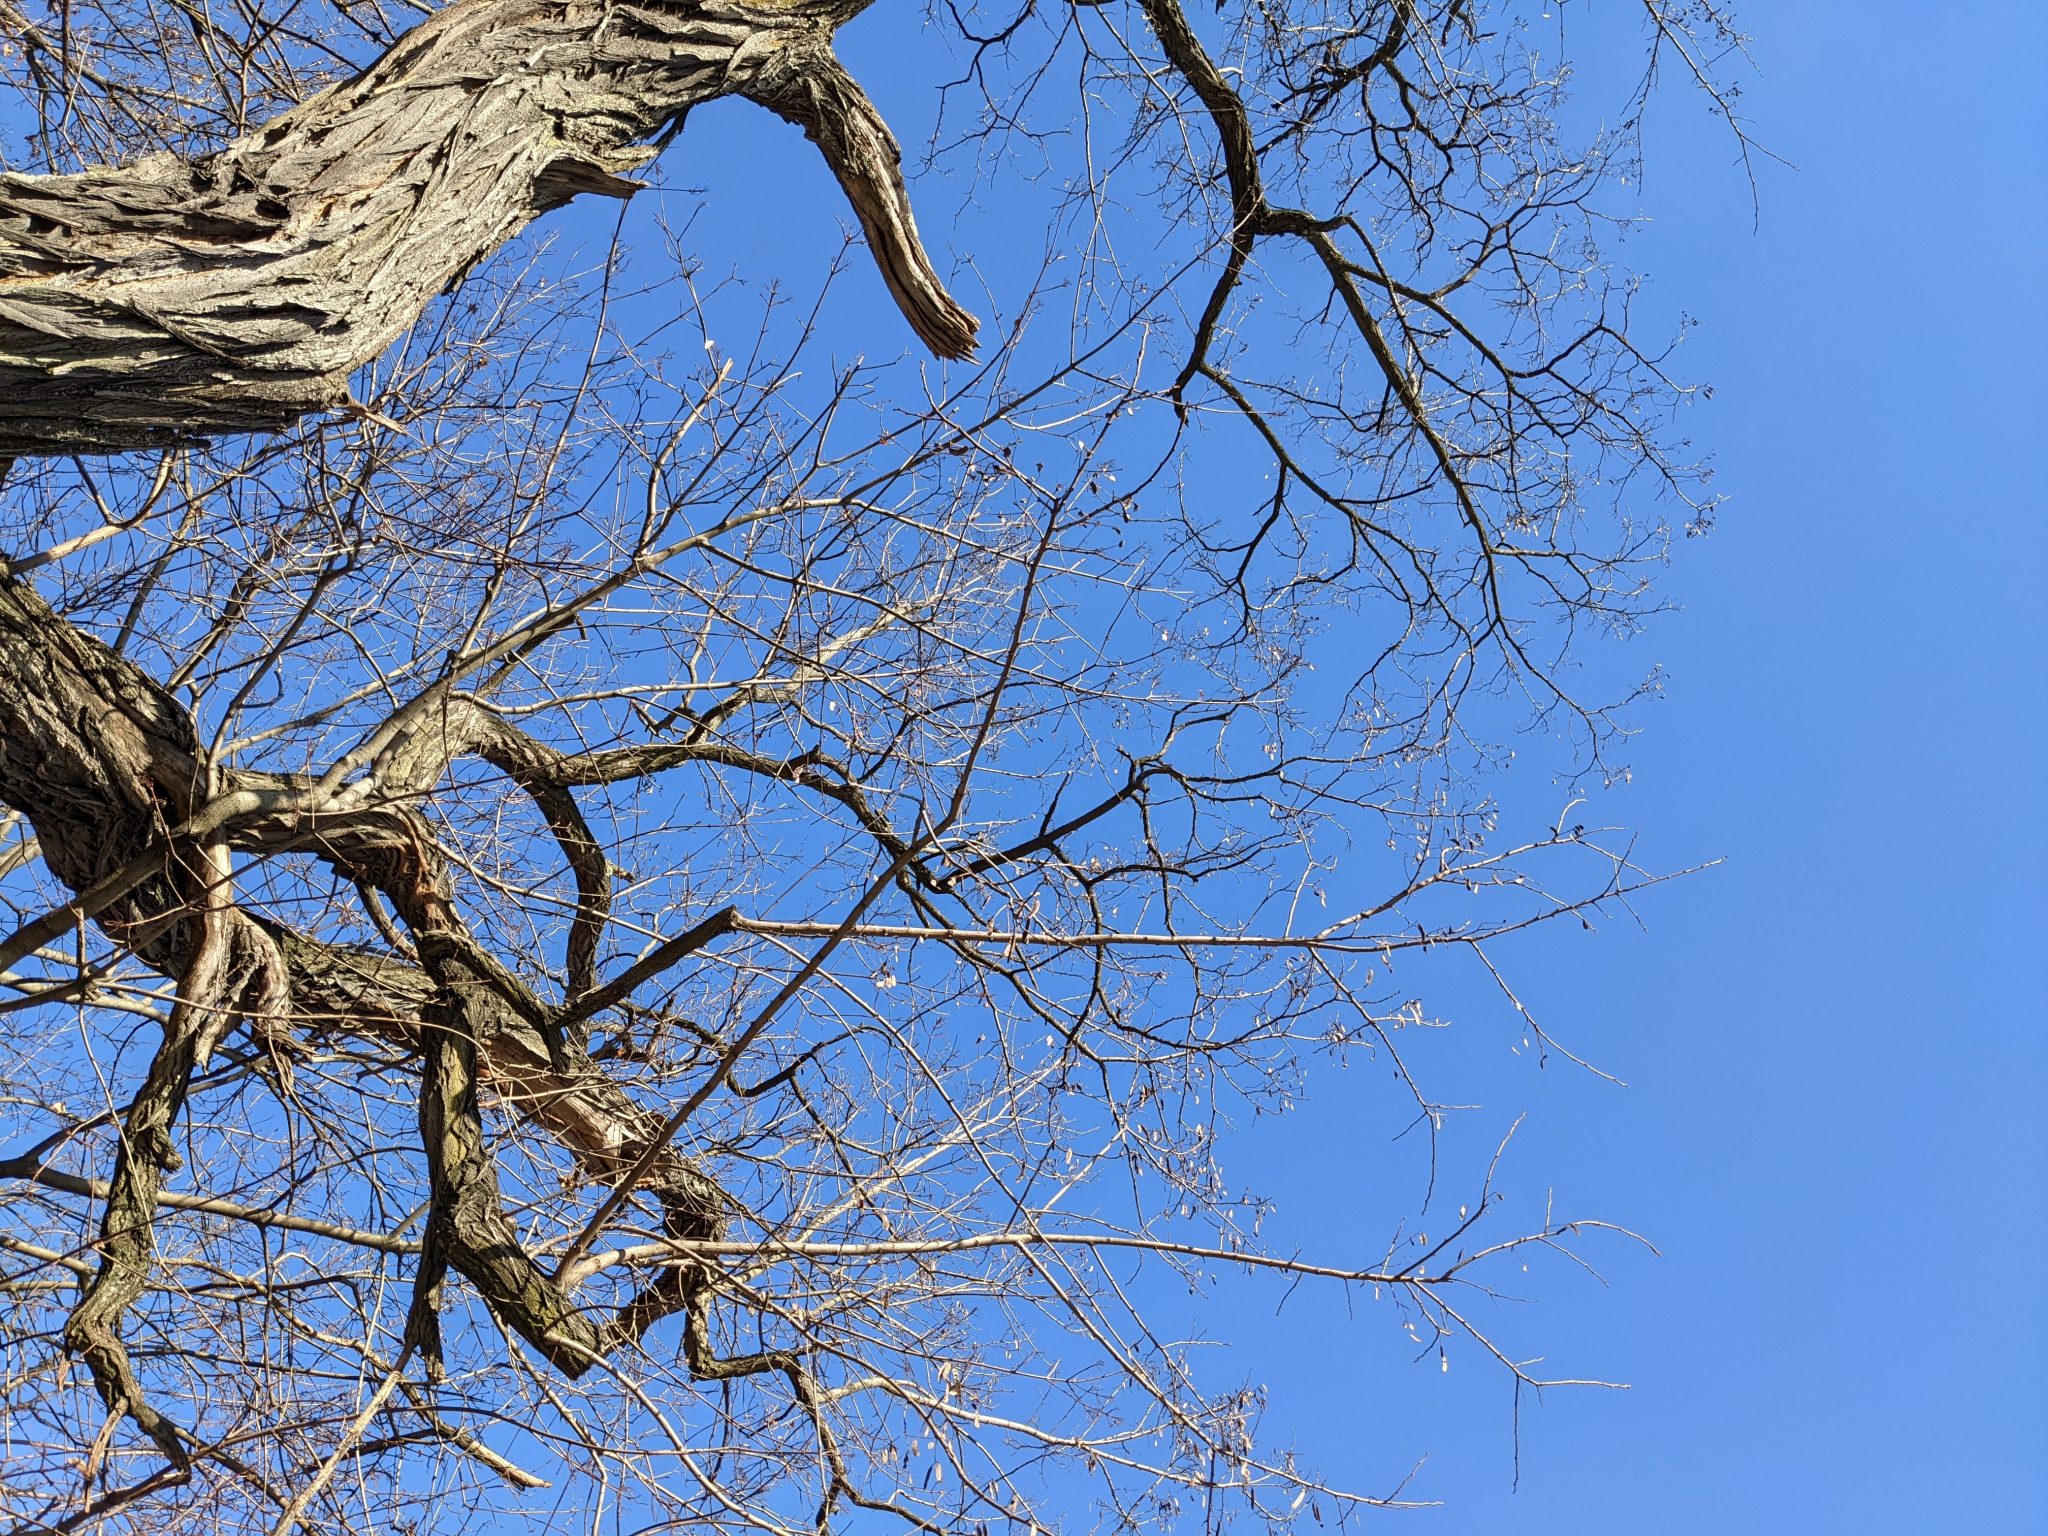 A few tree branches, with no leaves, in front of a very blue sky.